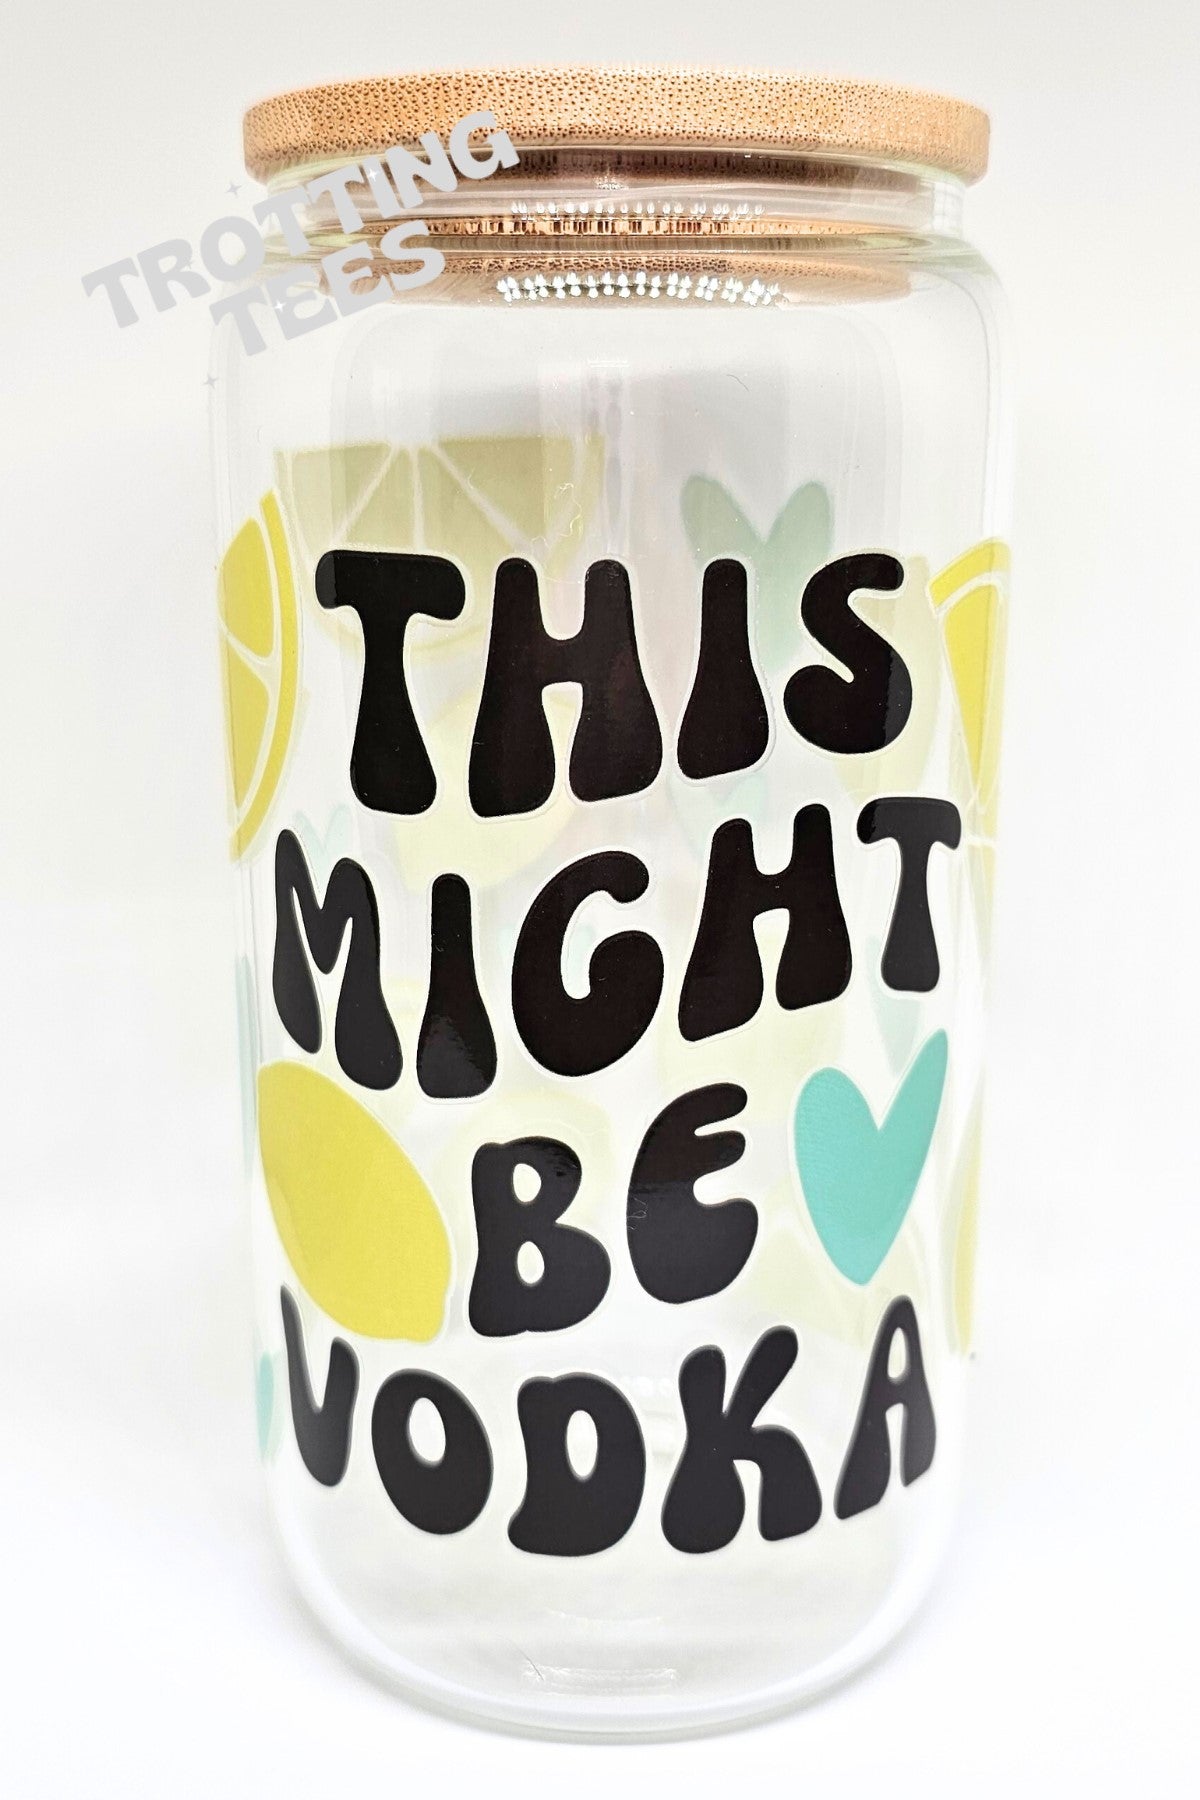 This Might Be Vodka 16oz Libby Cup